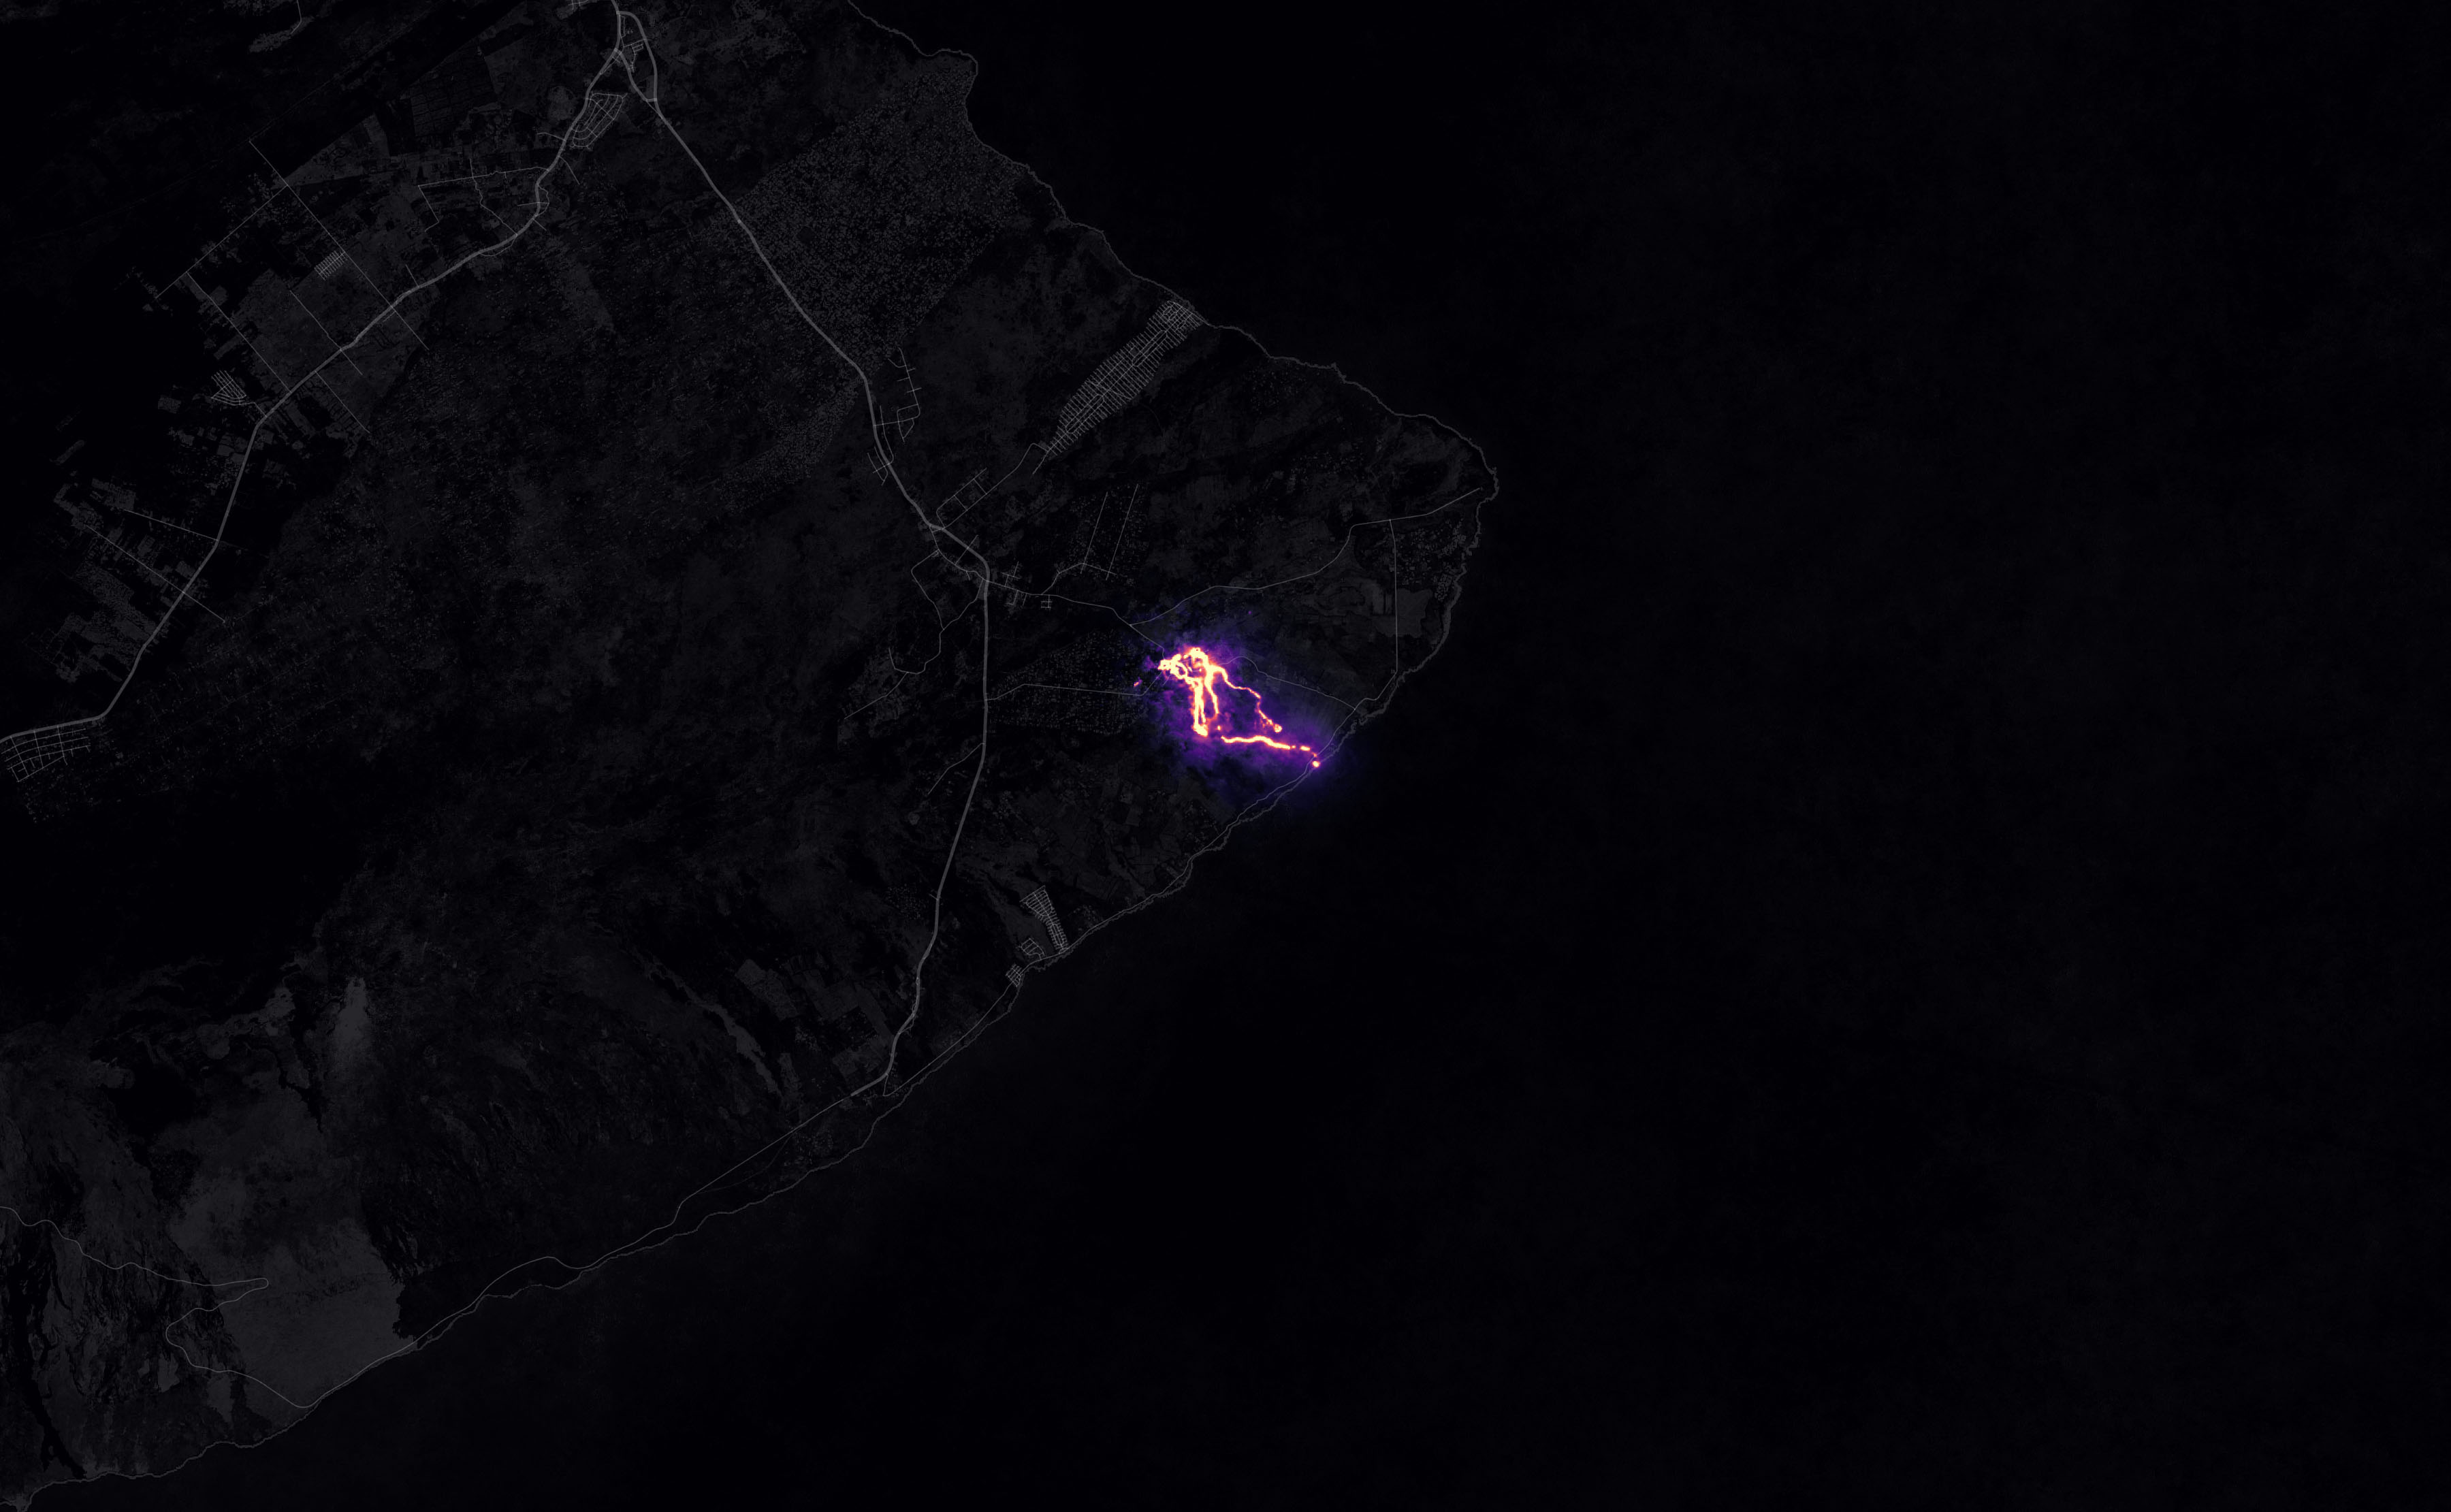 Kilauea lava seen from space